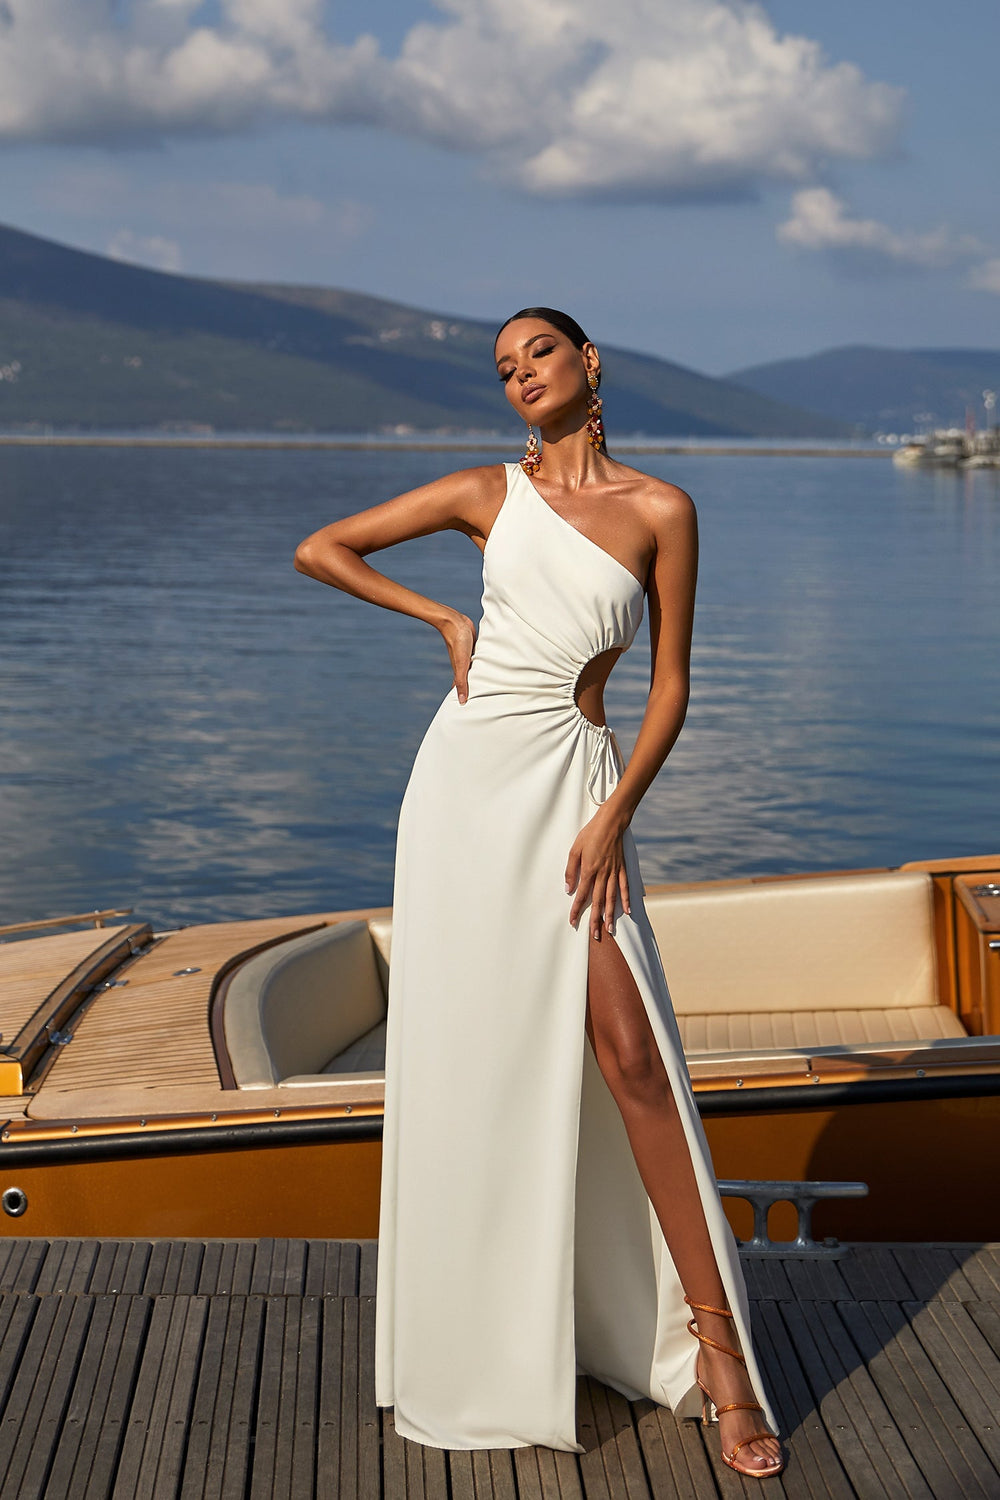 Rialda White Satin Maxi Dress with Waist Cut-Outs